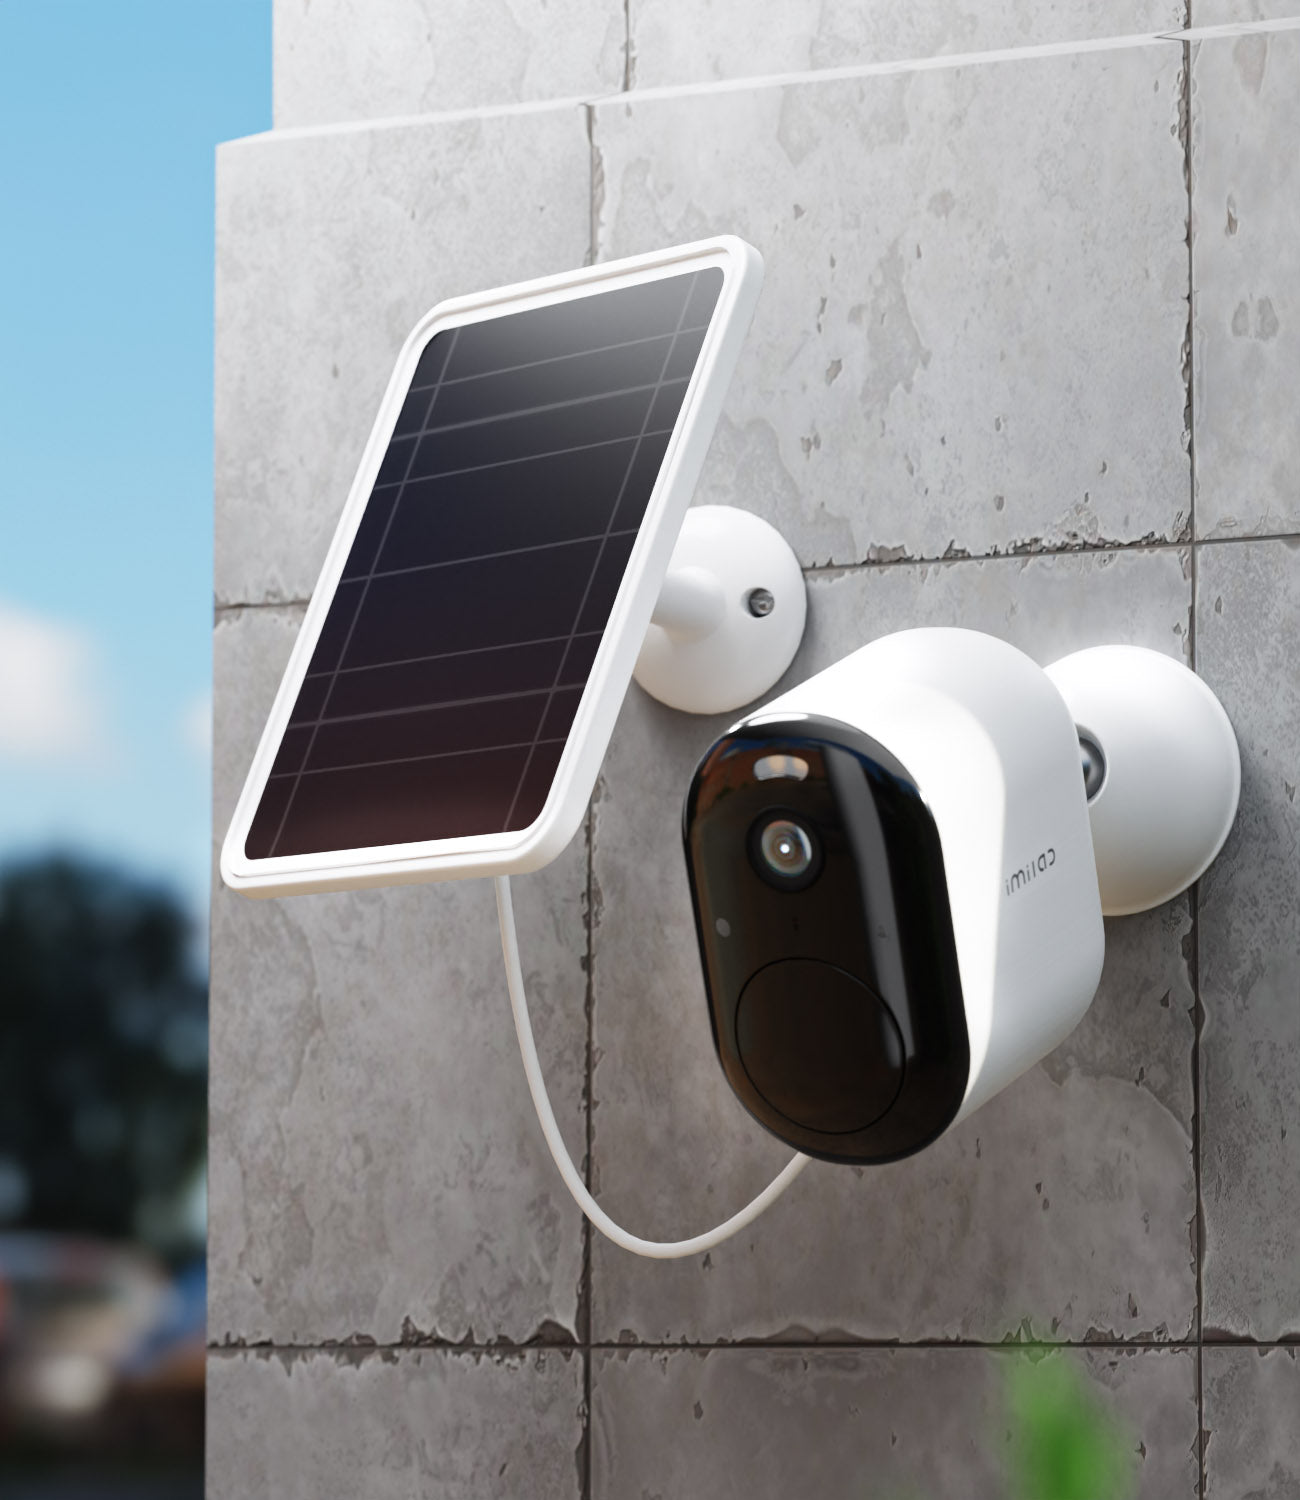 Solar-panel-charging-white-ec4-camera-on-grey-brick-wall-during-the-day